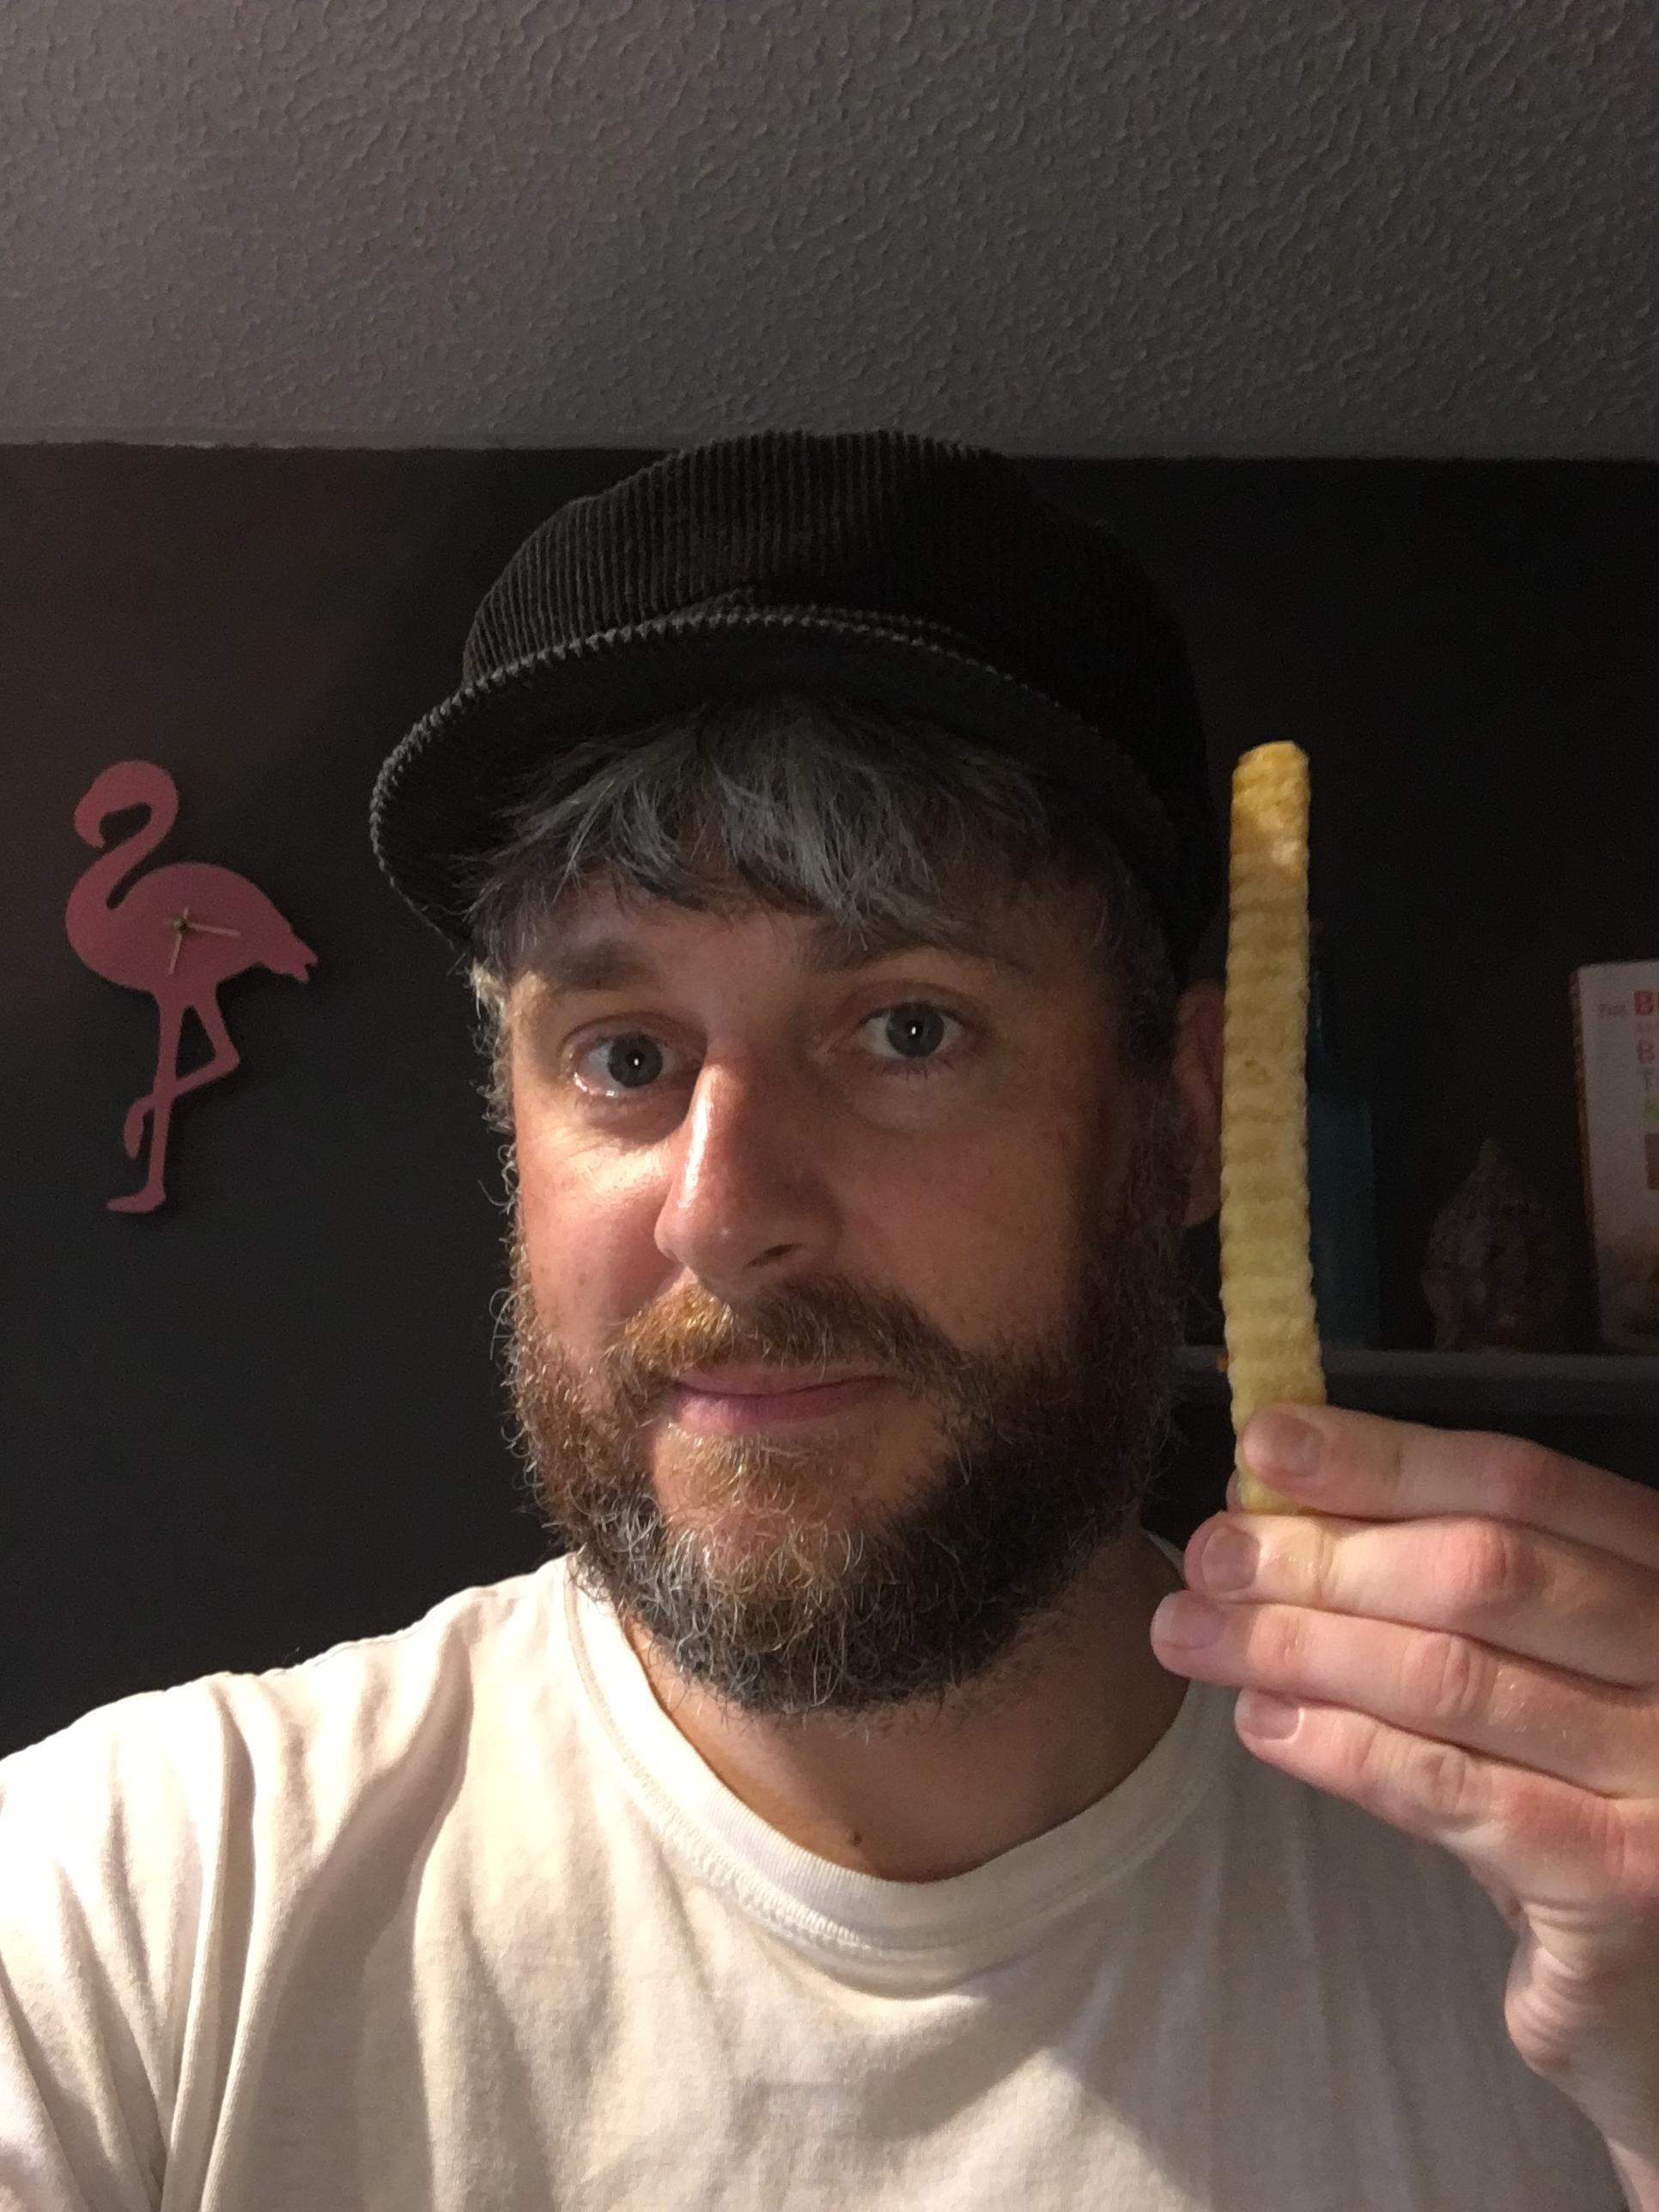 York resident 'amazed' by large chip during tea time in lock down